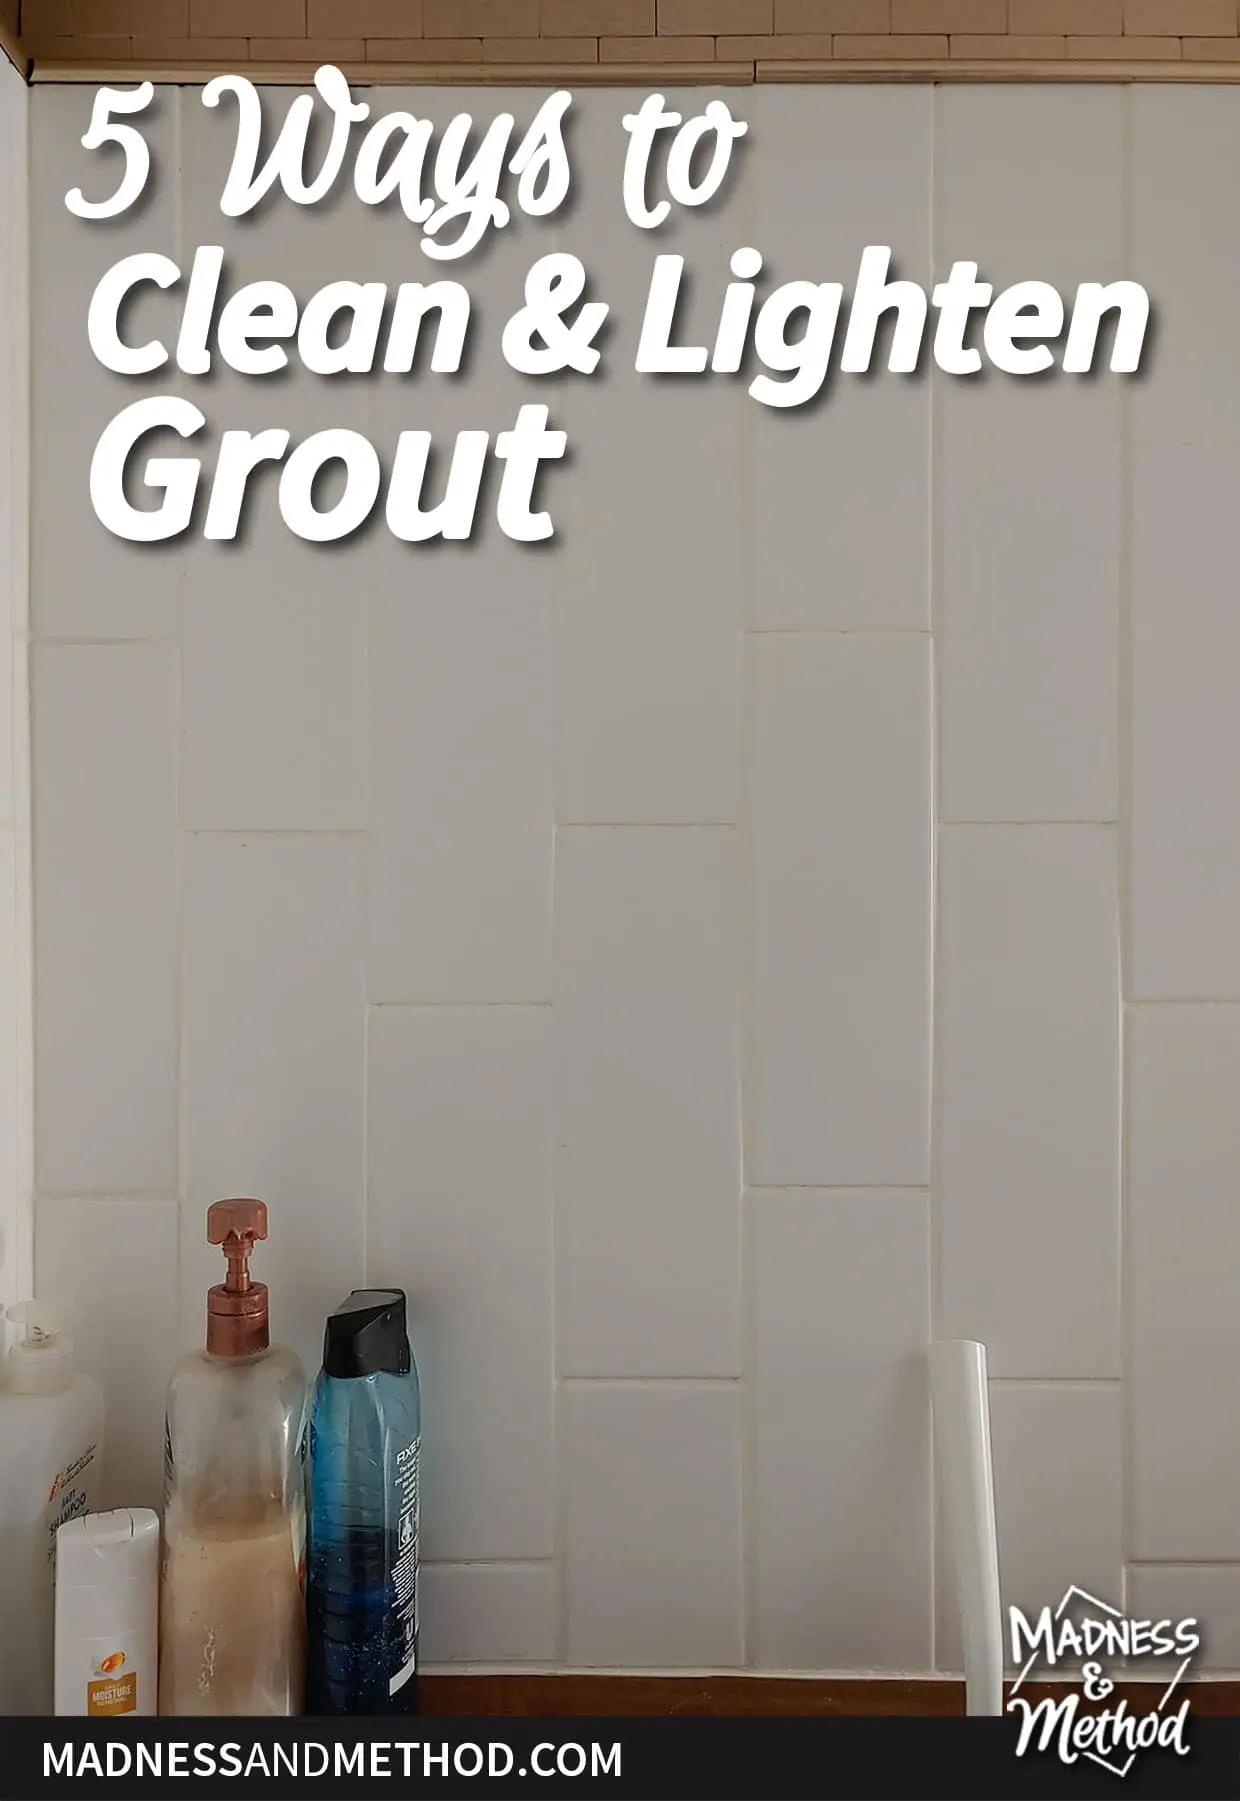 clean and lighten grout text overlay on shower ledge with soaps